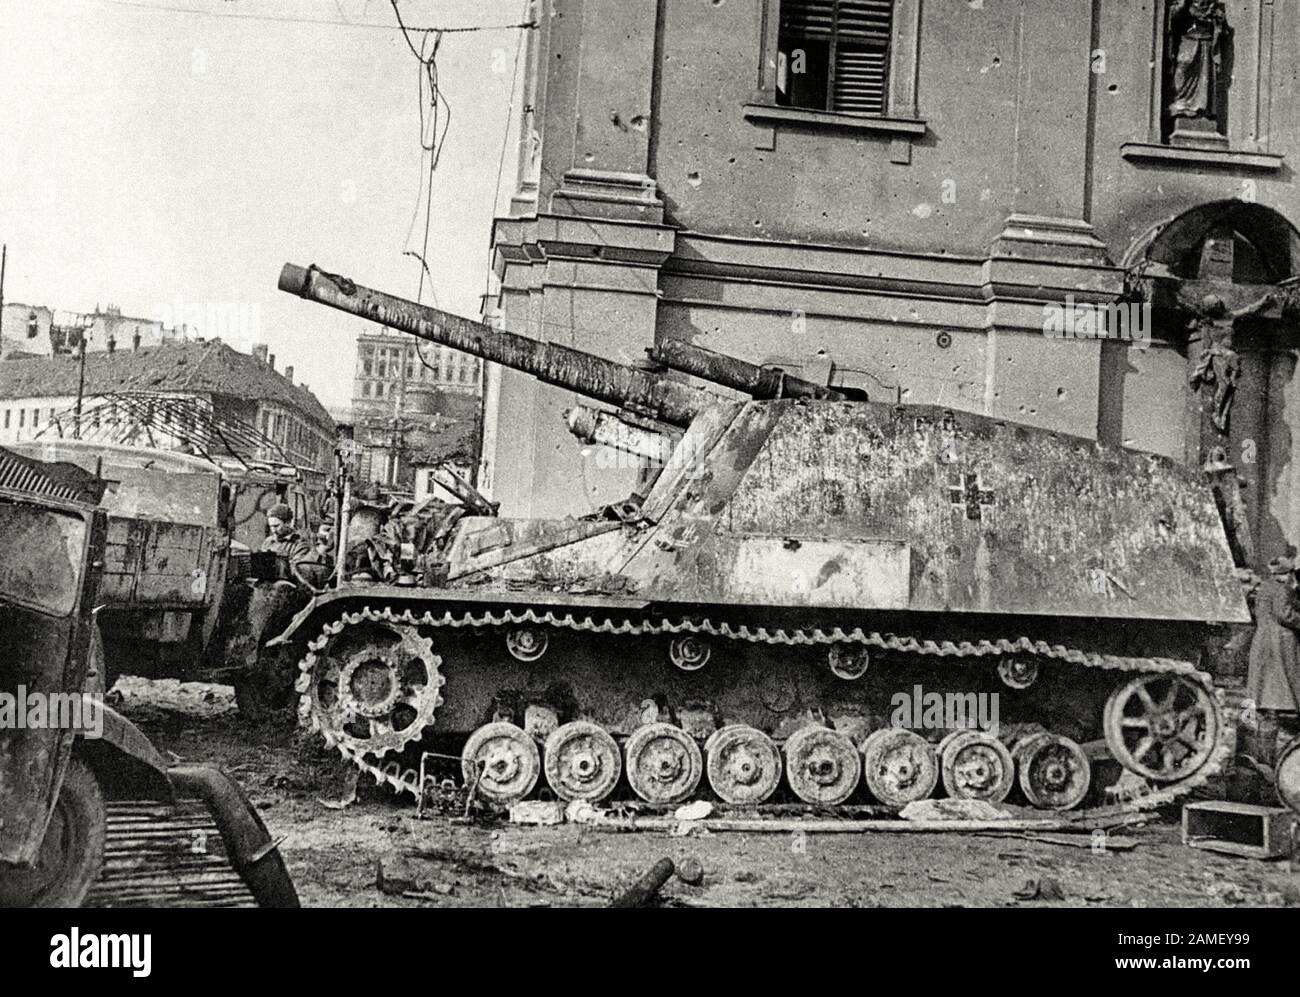 Abandoned or destroyed German 150-mm howitzer “Hummel” (Sd.Kfz.165 Panzerhaubitze Hummel) Budapest, captured by the Red Army. Locati Stock Photo - Alamy